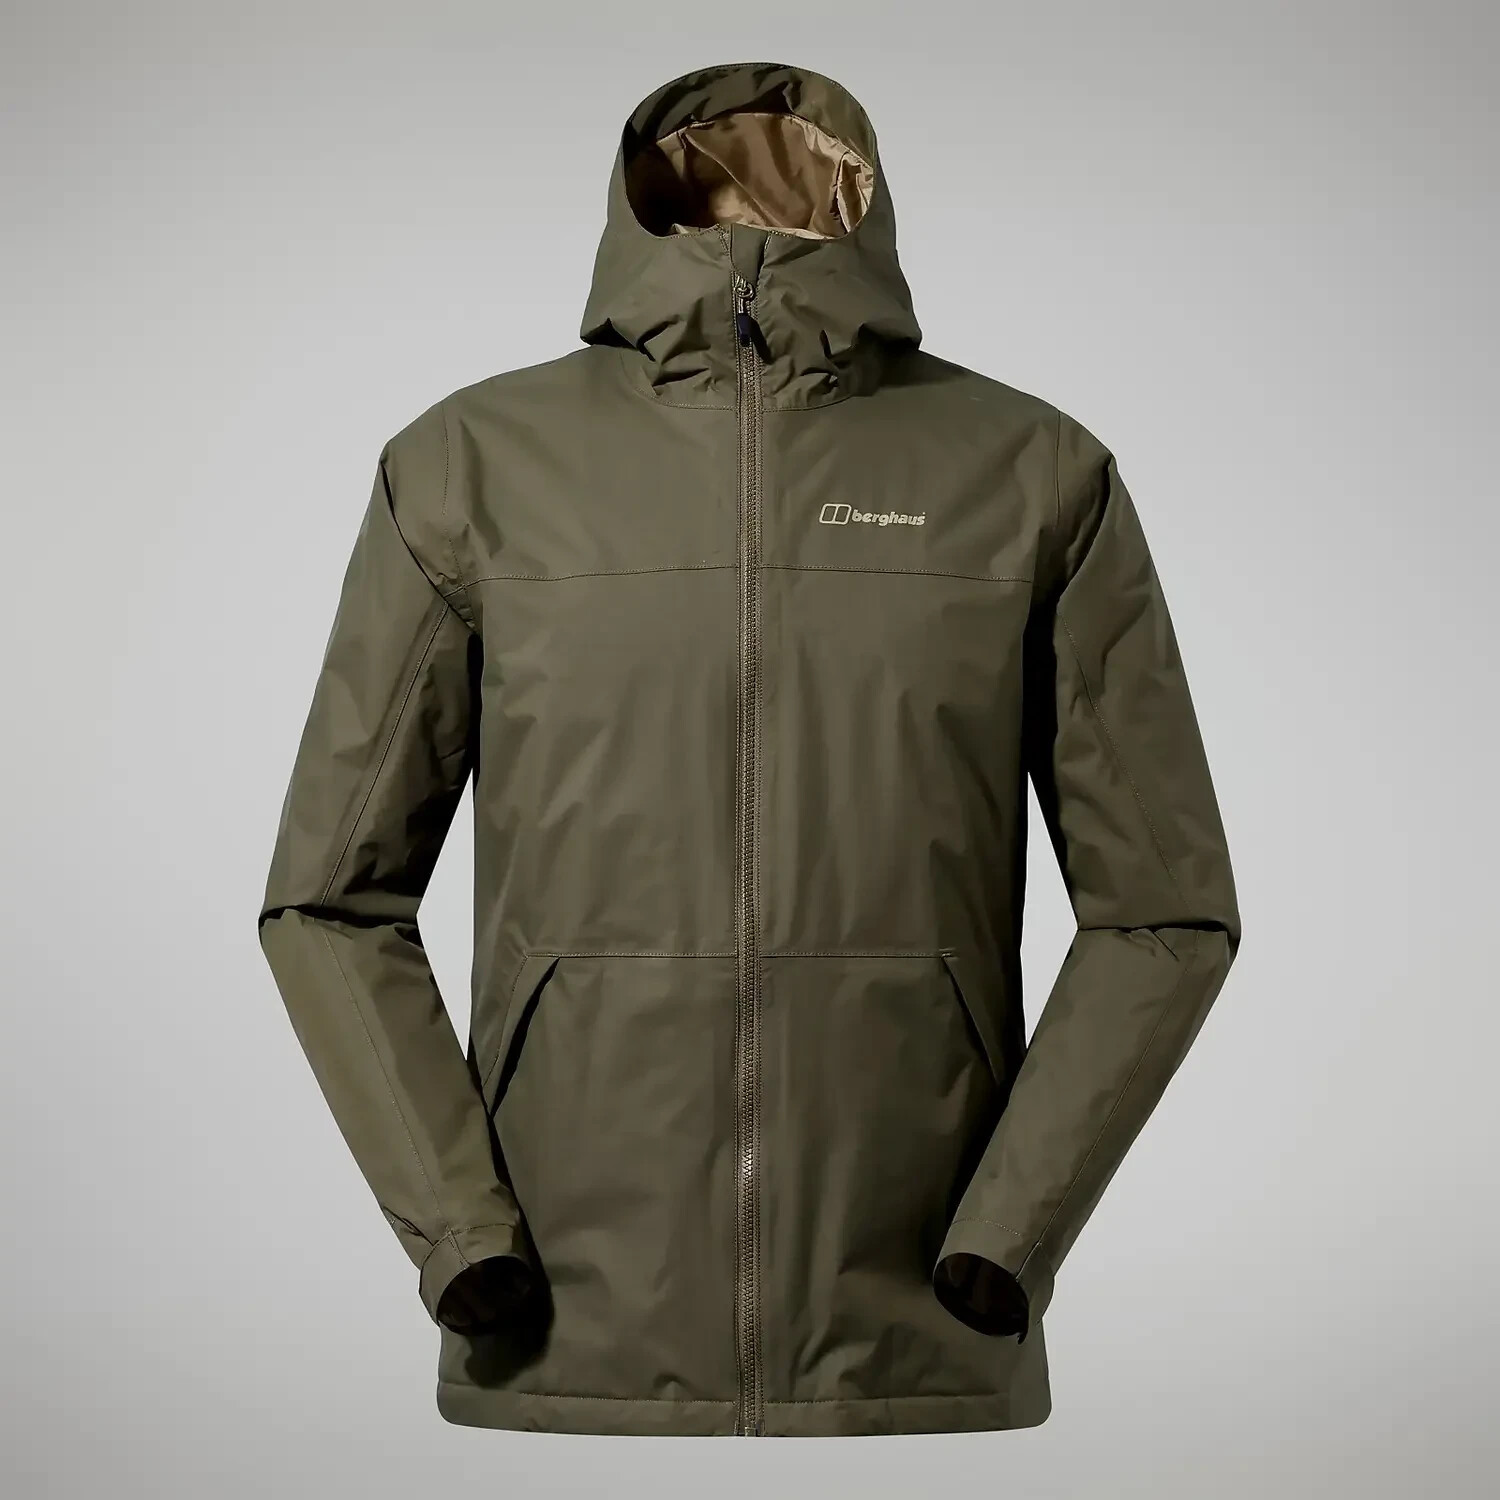 Image of Berghaus Deluge Pro 2.0 Insulated Waterproof Jacket Green